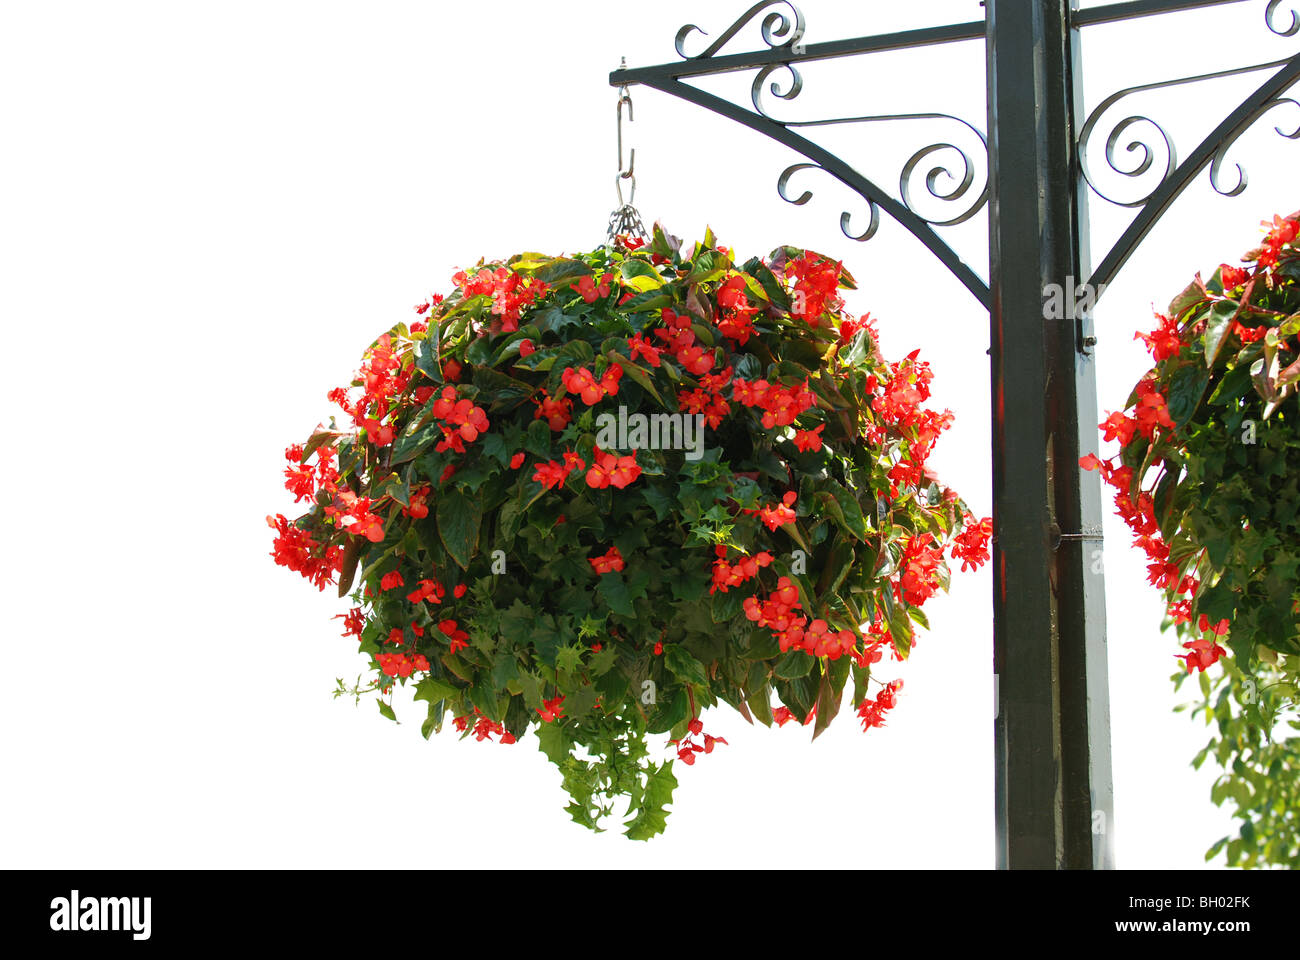 Flower basket on a post Stock Photo